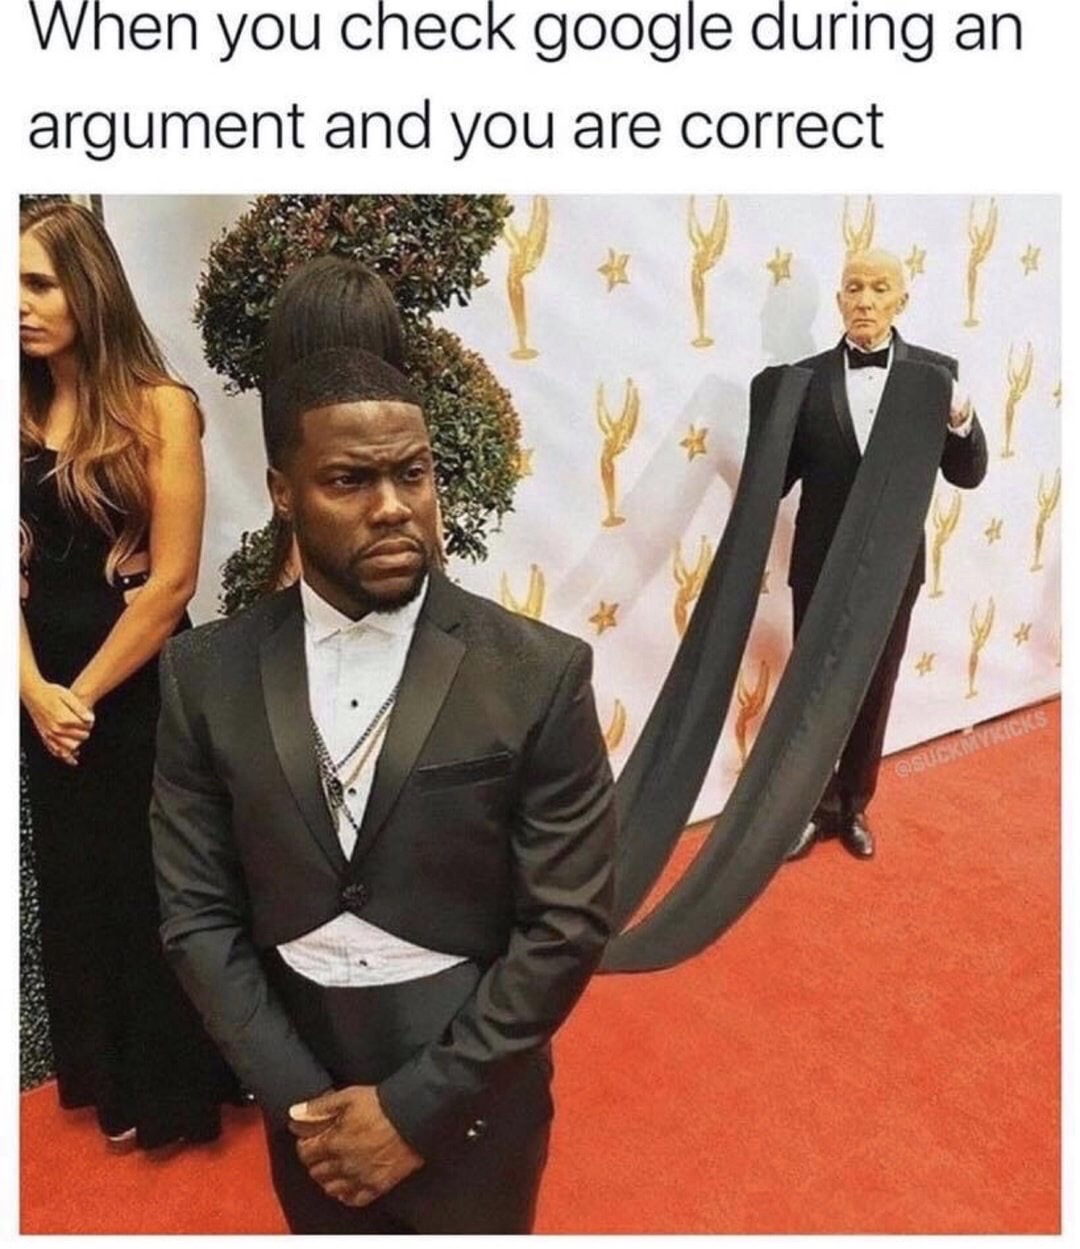 kevin hart wedding meme - When you check google during an argument and you are correct Suckm